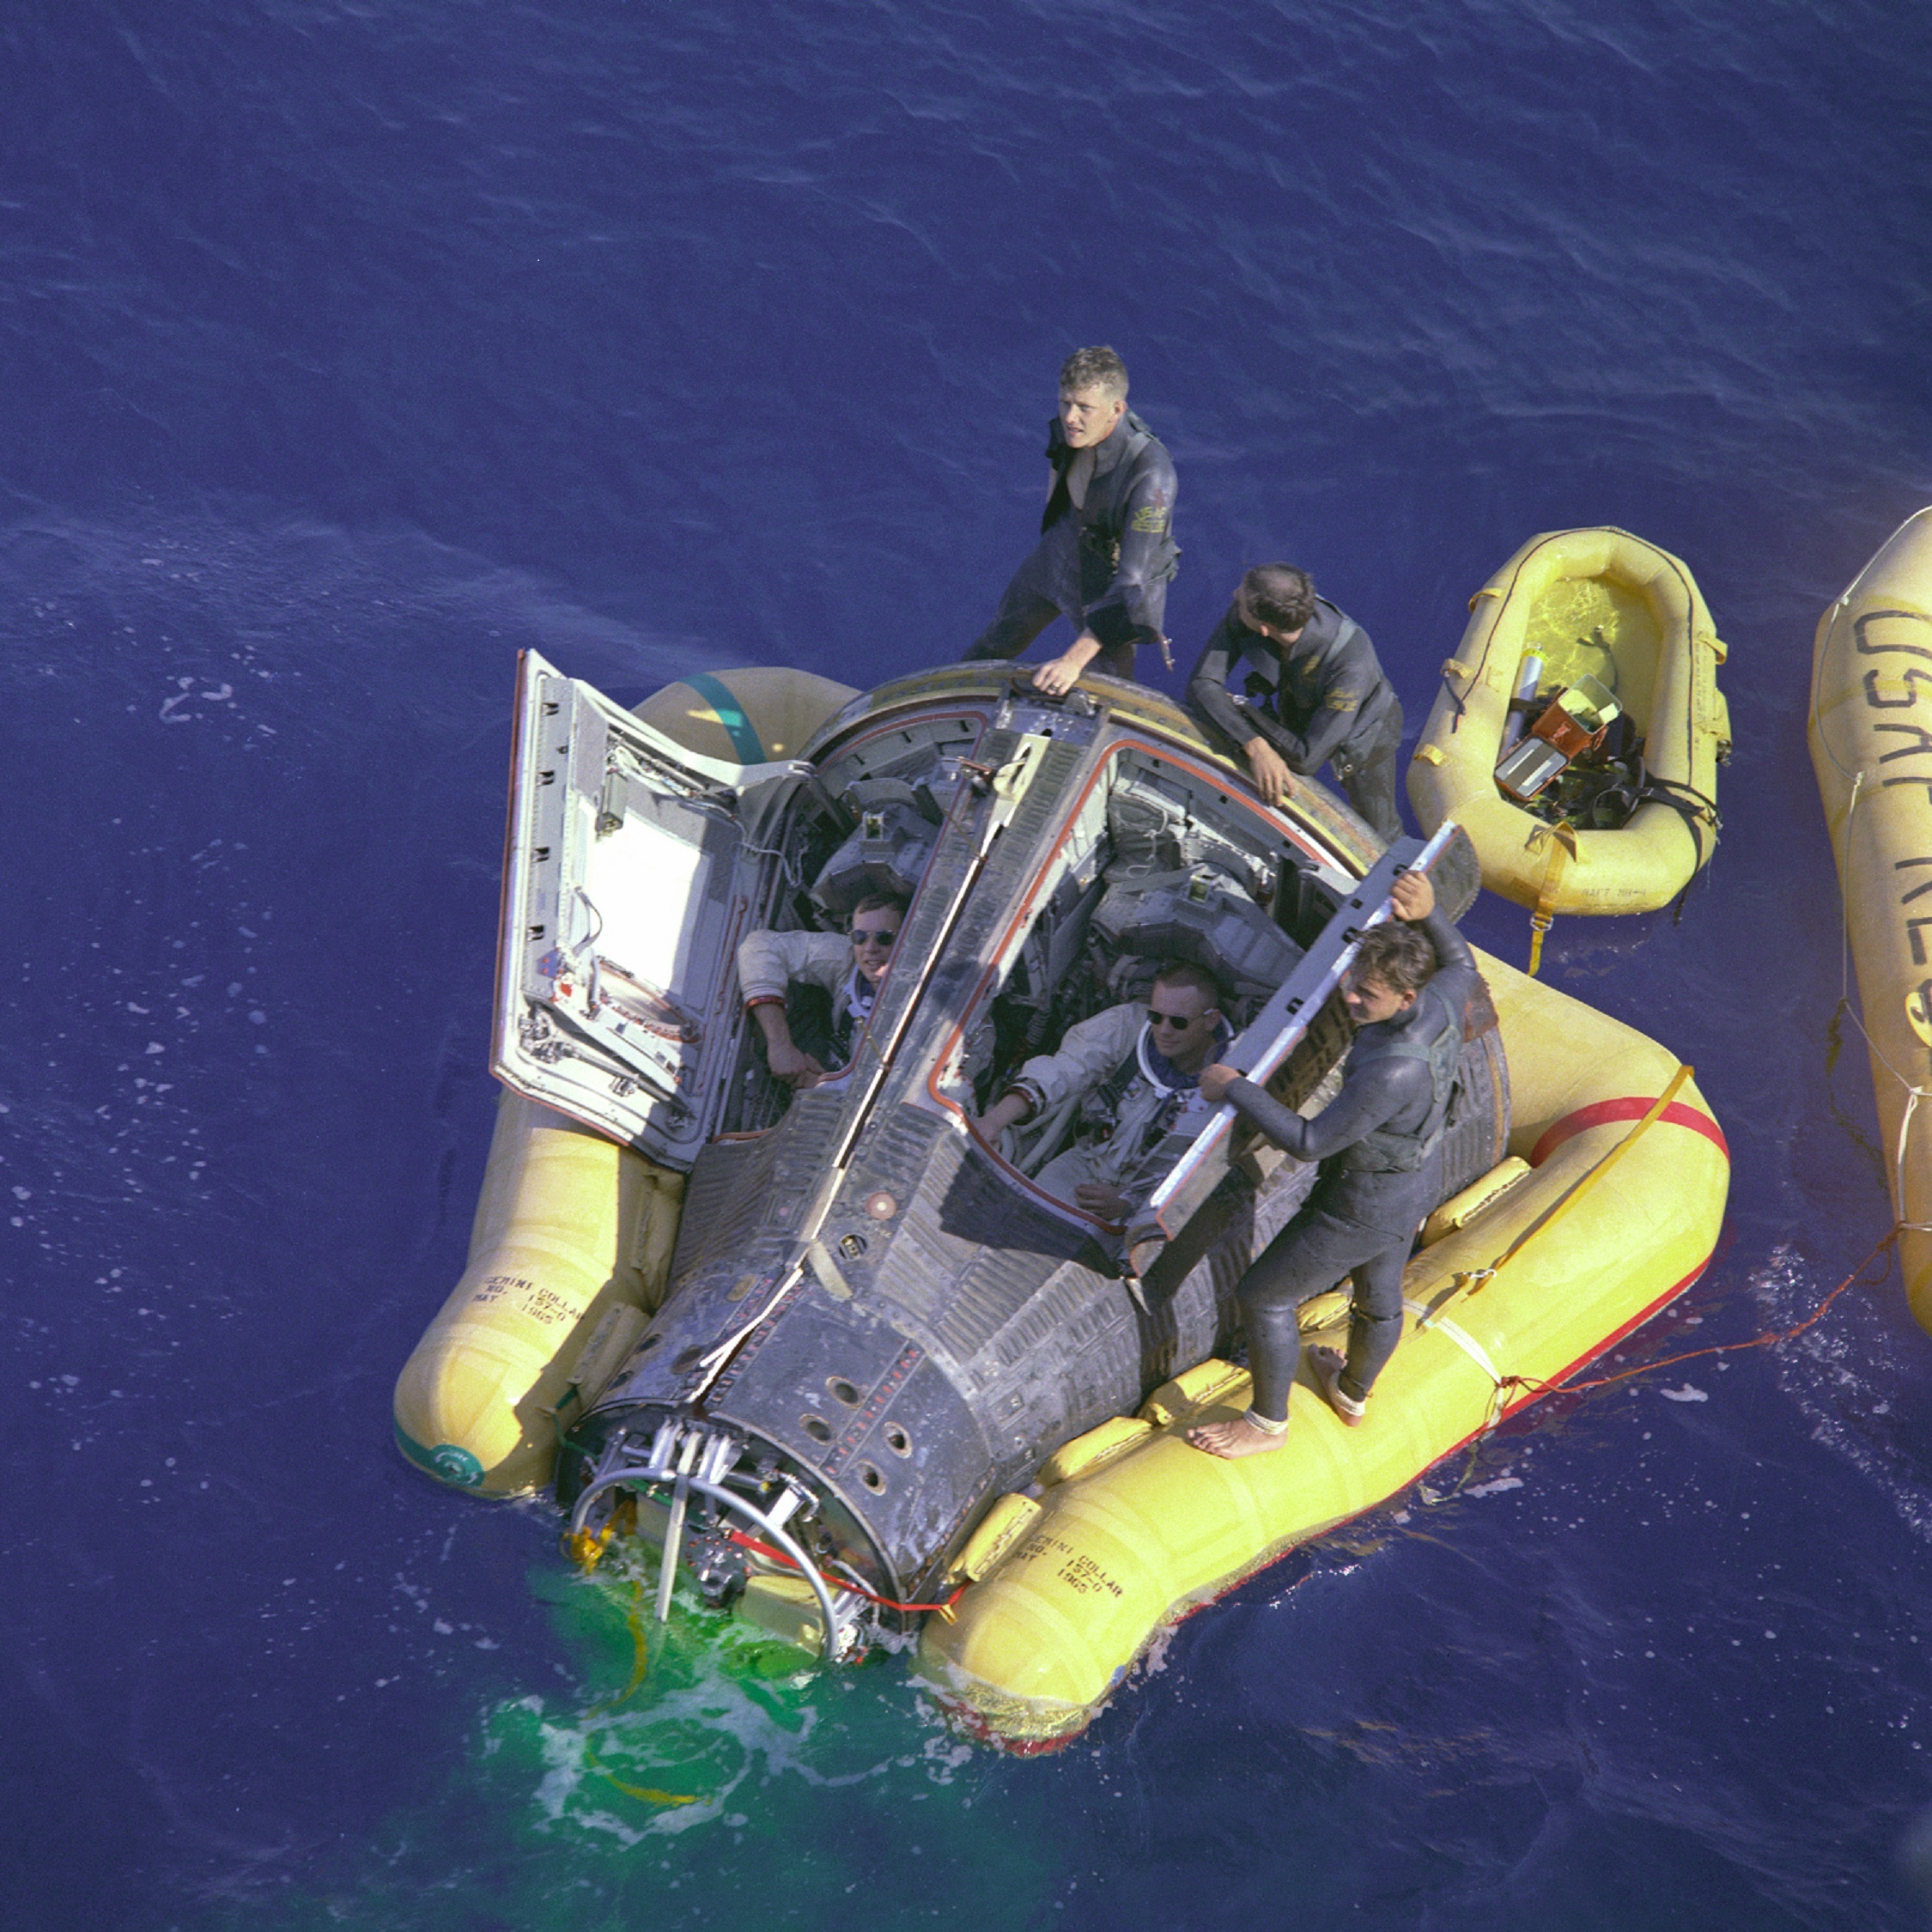 Astronauts David R. Scott, Pilot (left) and Neil A. Armstrong, Command Pilot (right) with U.S. Air Force pararescue jumpers at the end of the nearly disastrous Gemini 8 mission, 17 March 1966. (NASA)